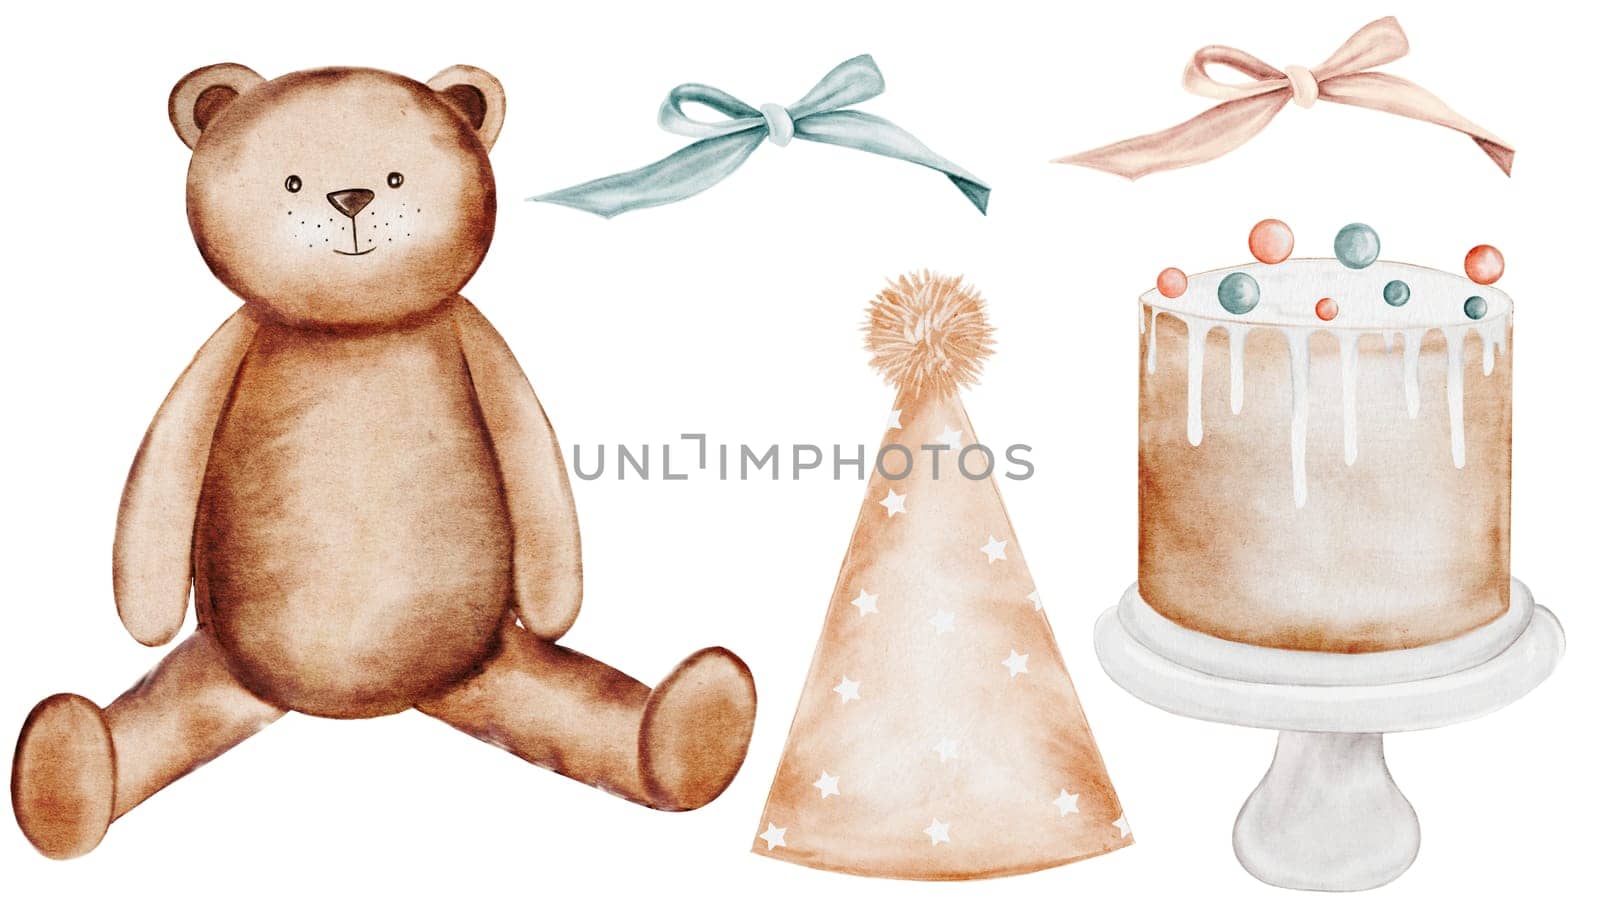 Happy Birthday Watercolor set. Hand drawn festive elements teddy bear, cake on stand, cap and bows. Clip art isolated on white background in neutral colors. Ideal for cards, invitations and birthday and baby shower decorations. Illustration for party by TatyanaTrushcheleva